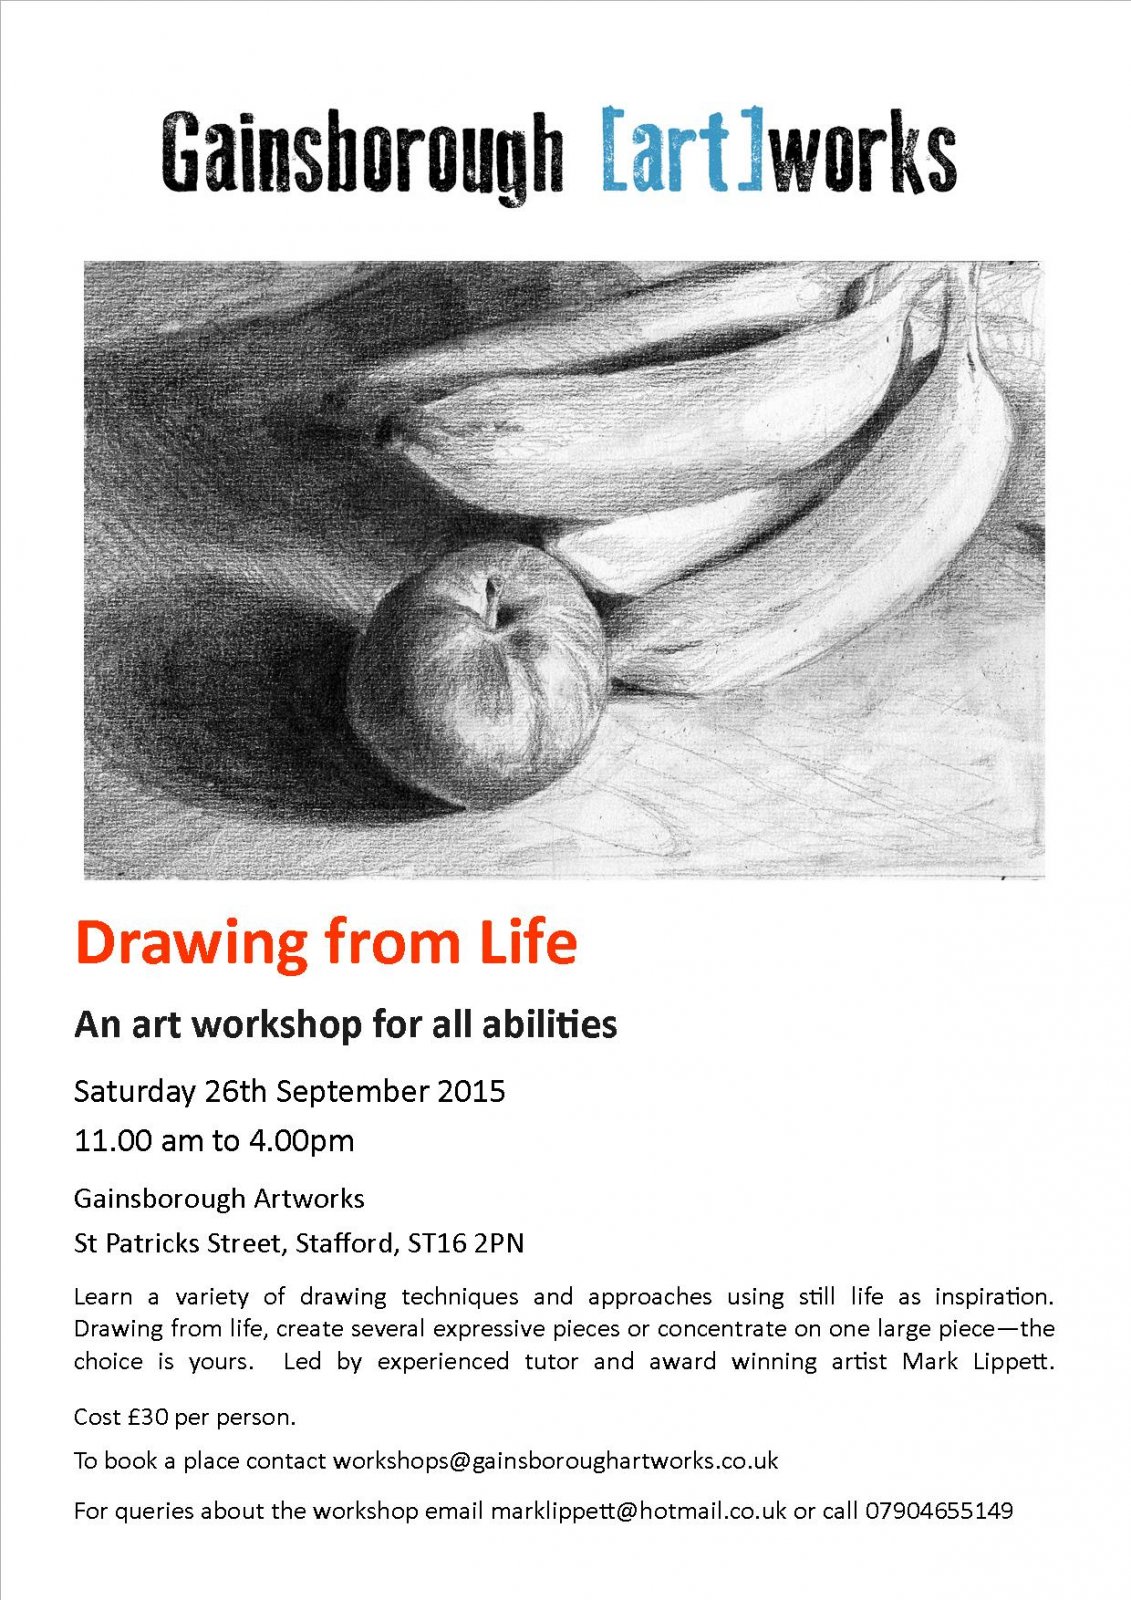 Drawing from Life poster - 26th September 2015.jpg